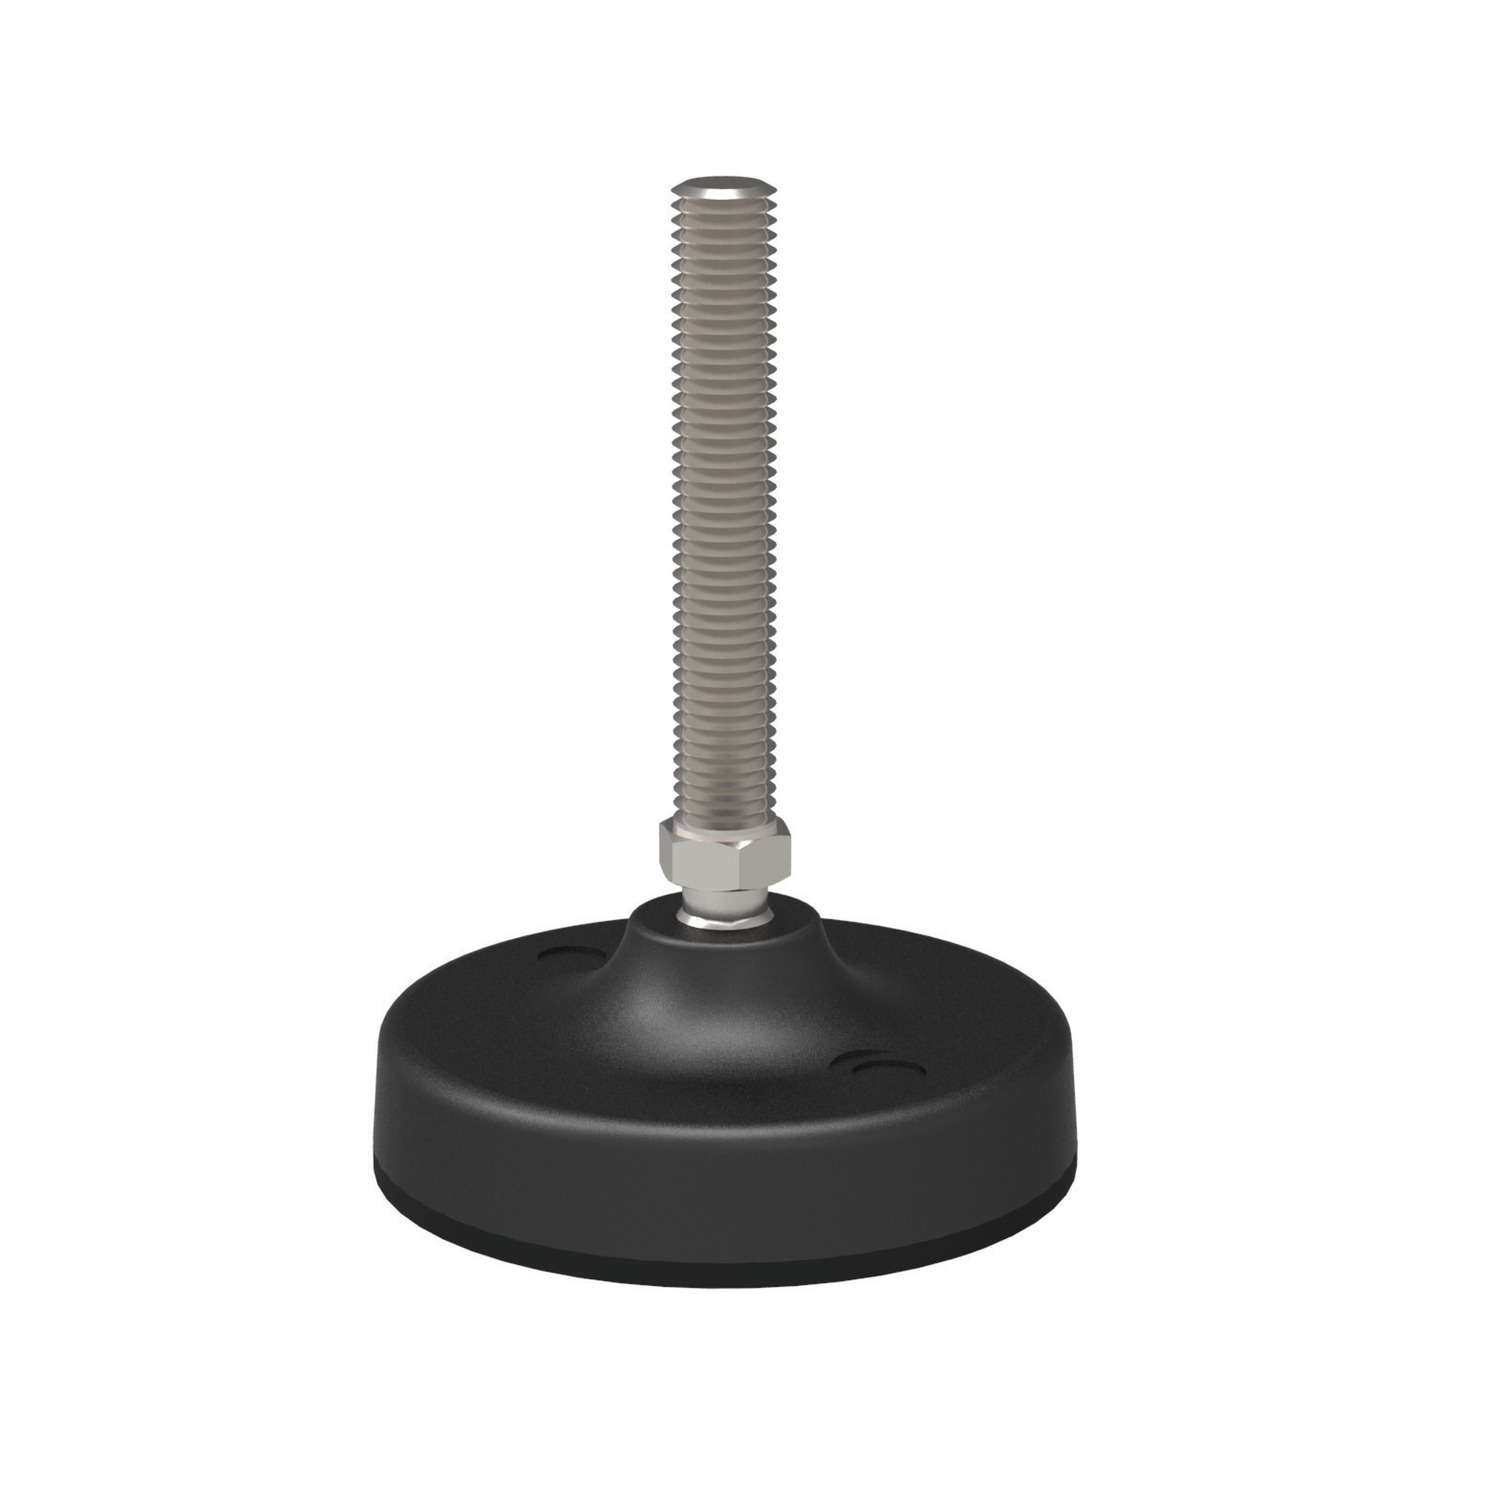 Levelling Feet Stainless steel (AISI 304) bolt, reinforced polyamide feet and anti-slip pad. Thread allows for up to 30° articulation of the foot.